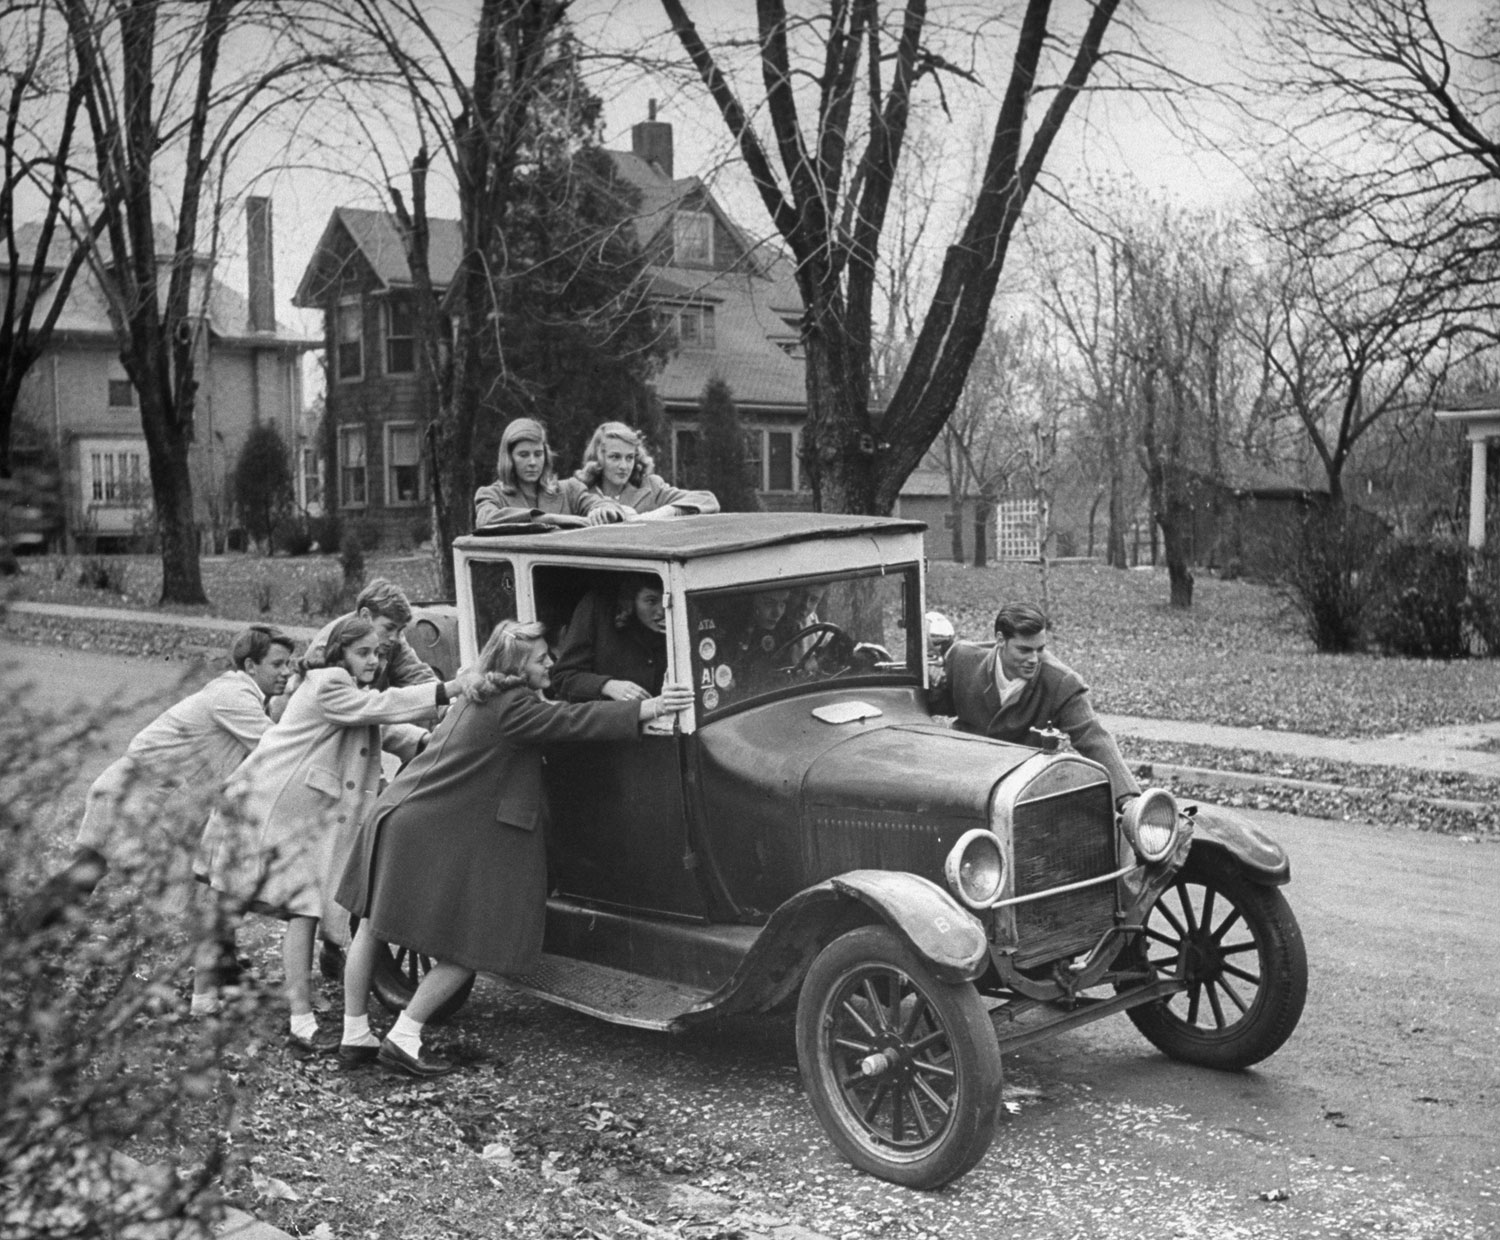 Gang of teen-agers push boyfriend's model T to get it started. Car is 17 years old and can hold 12 boys and girls. Favorite ride is out to football game.